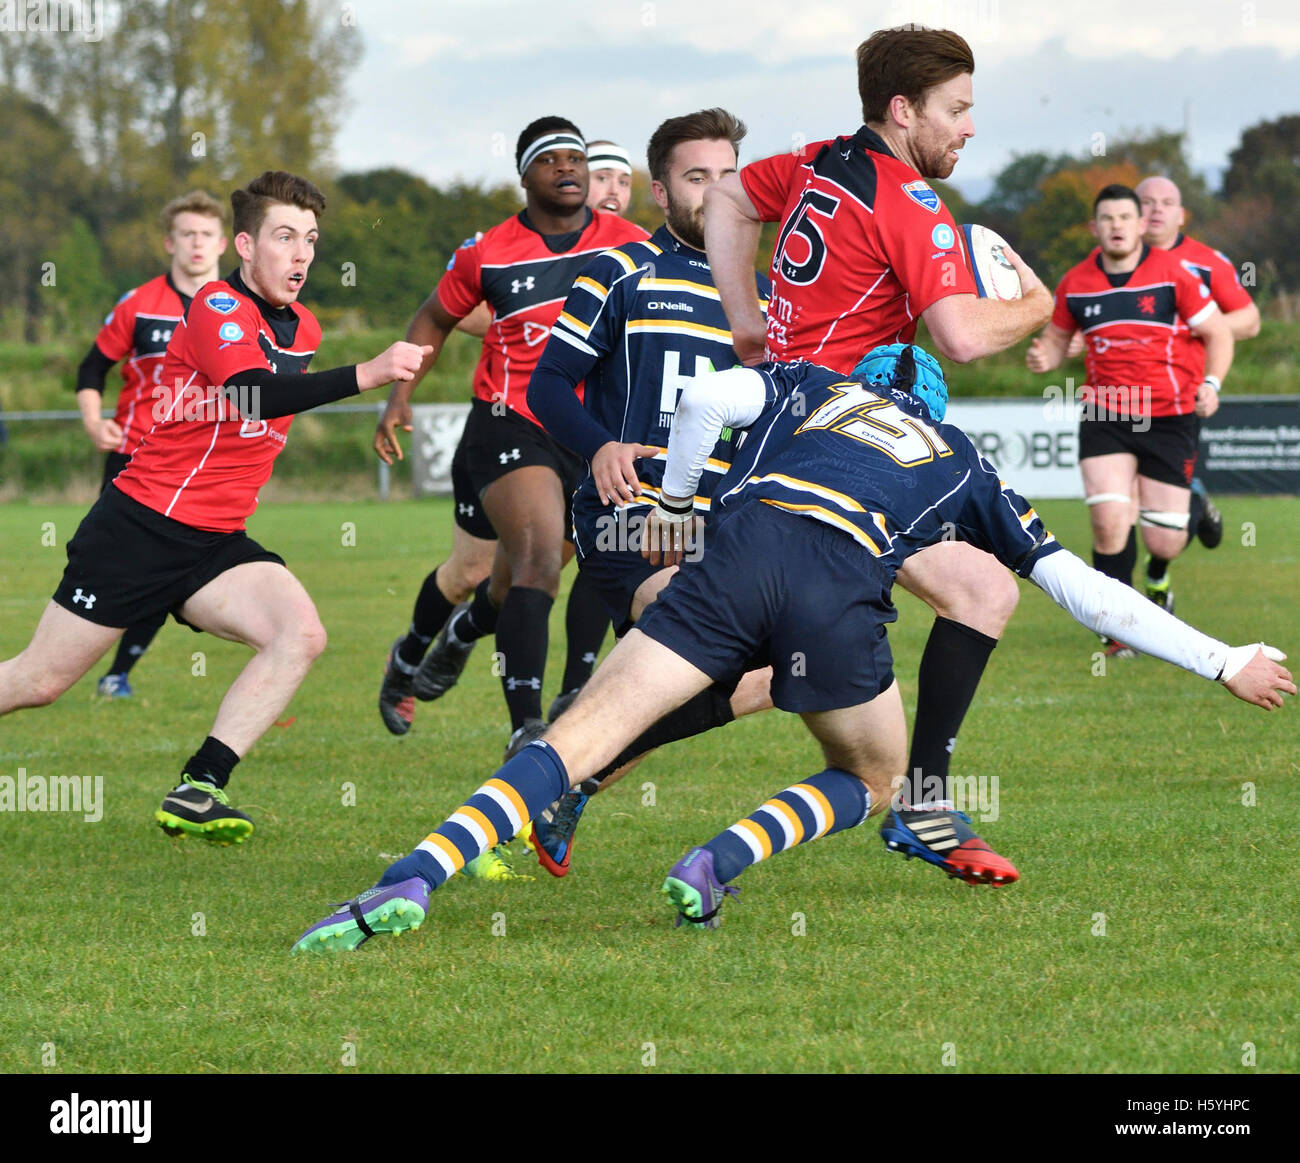 Manchester  UK  22nd October 2016  Action from the South Lancs/Cheshire Division 1 match between Broughton Park, in red, and Anselmians, in hoops. Broughton Park win 59-12 to move to fourth in the table. Stock Photo